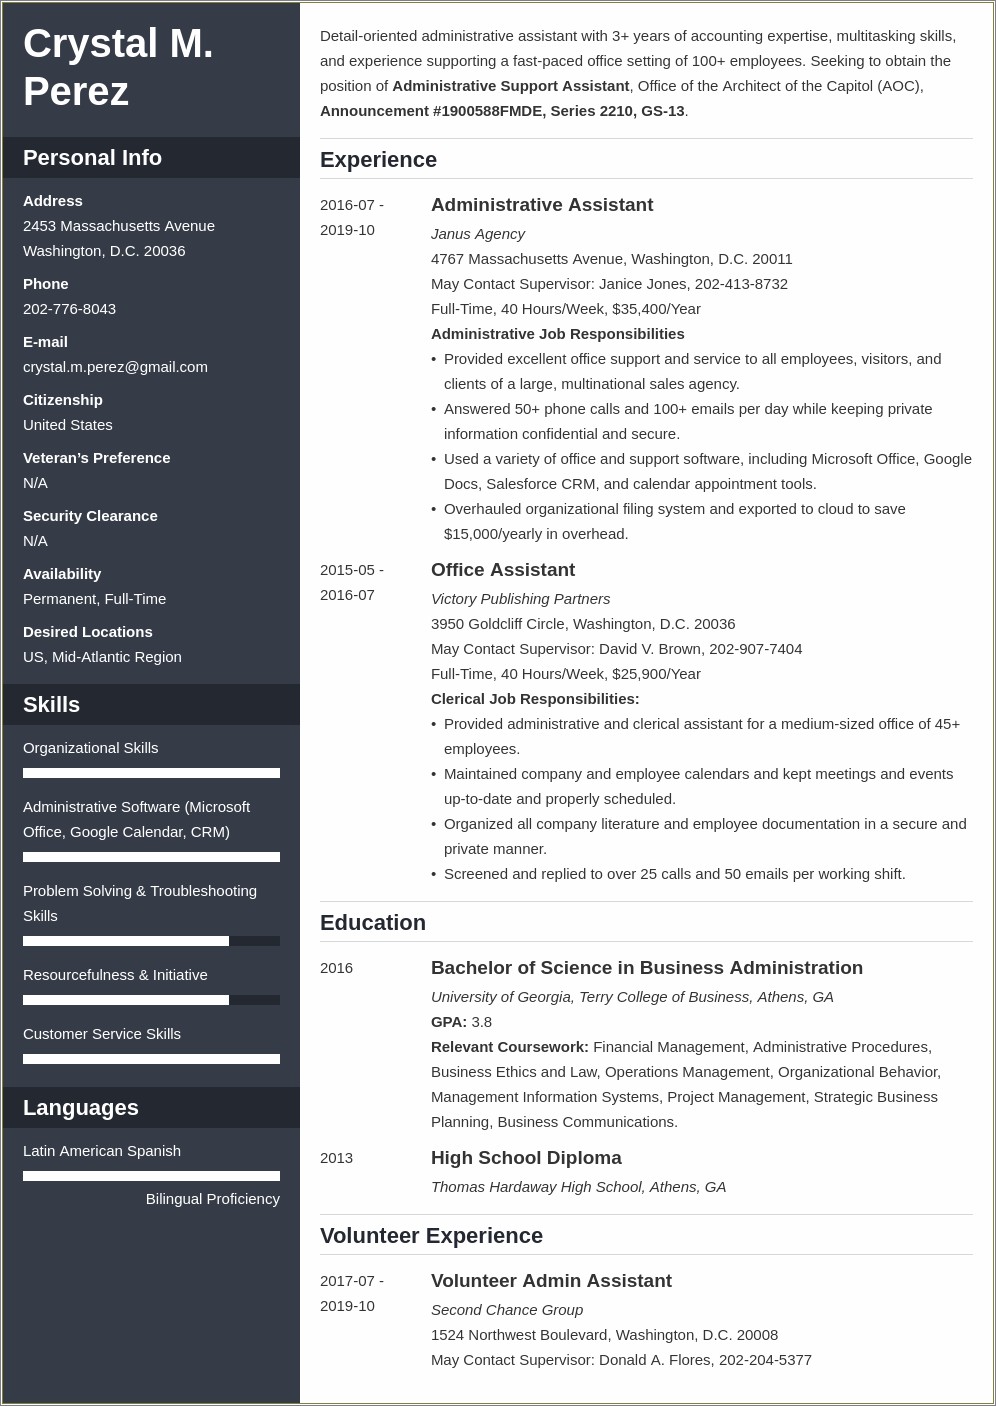 Example Of A Federal Job Resume